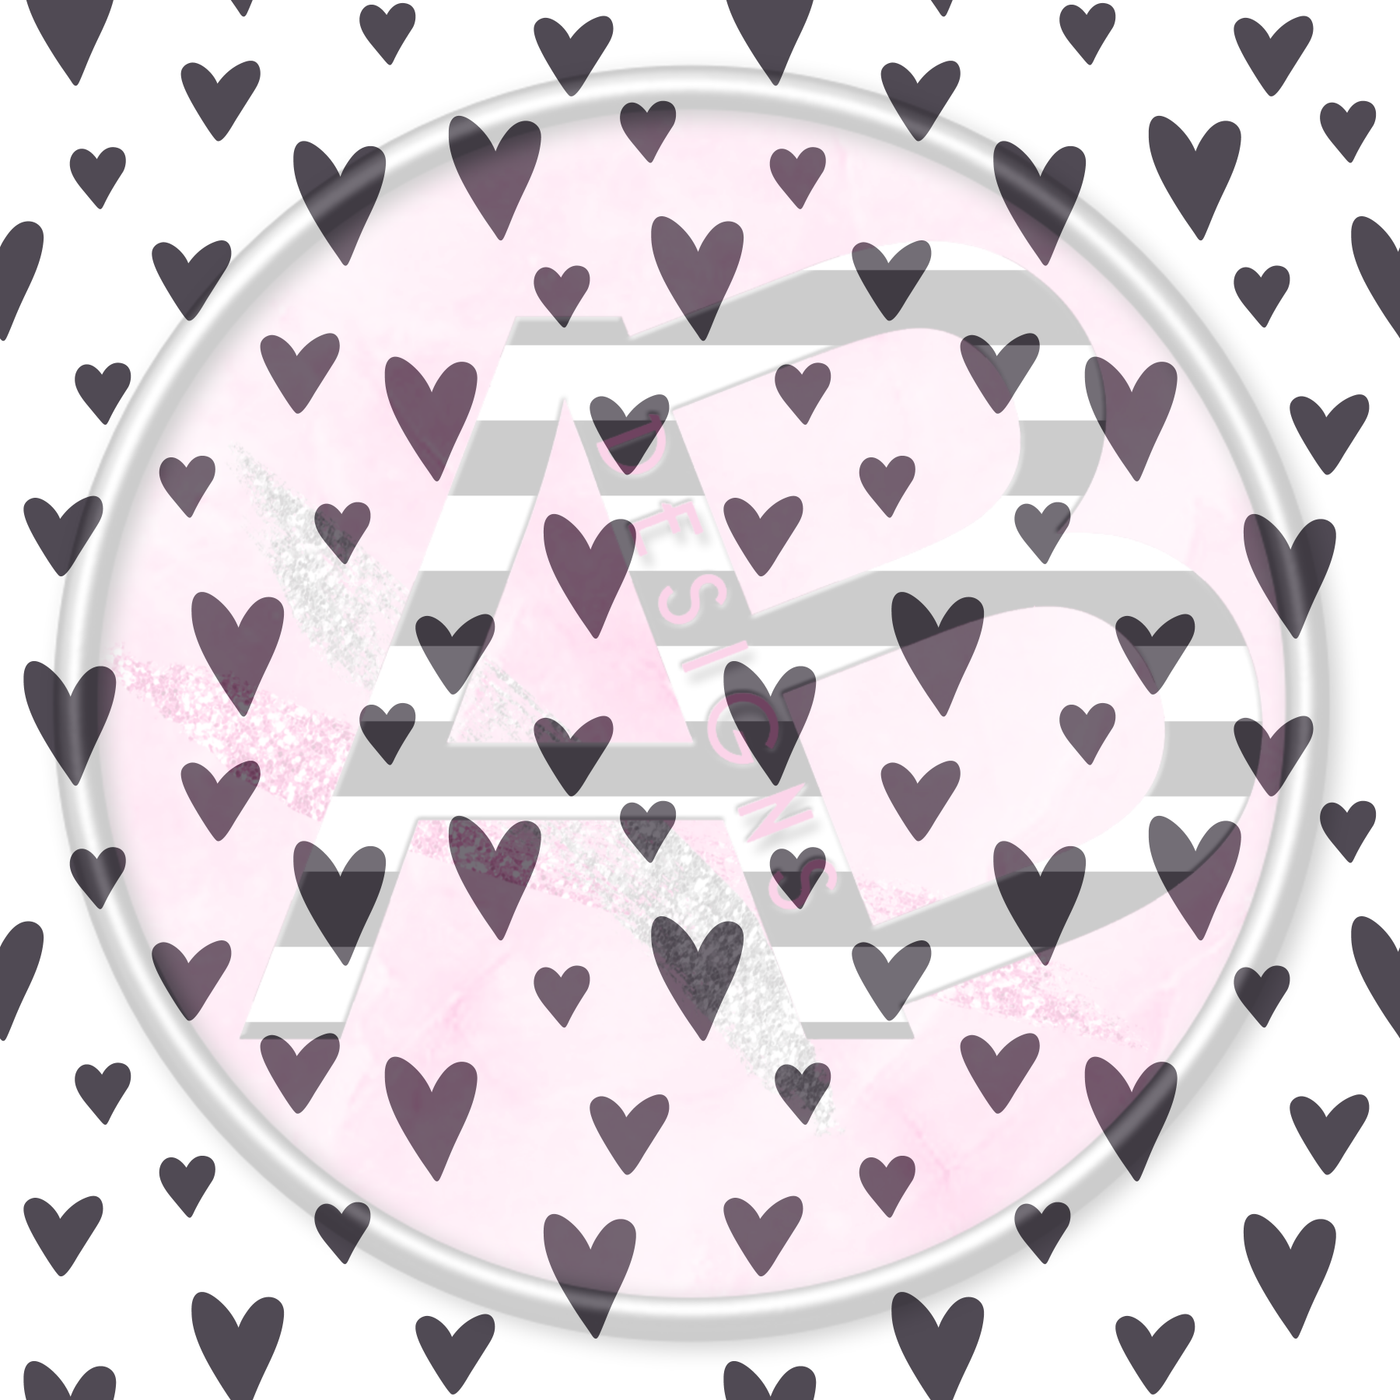 Adhesive Patterned Vinyl - Hearts 12